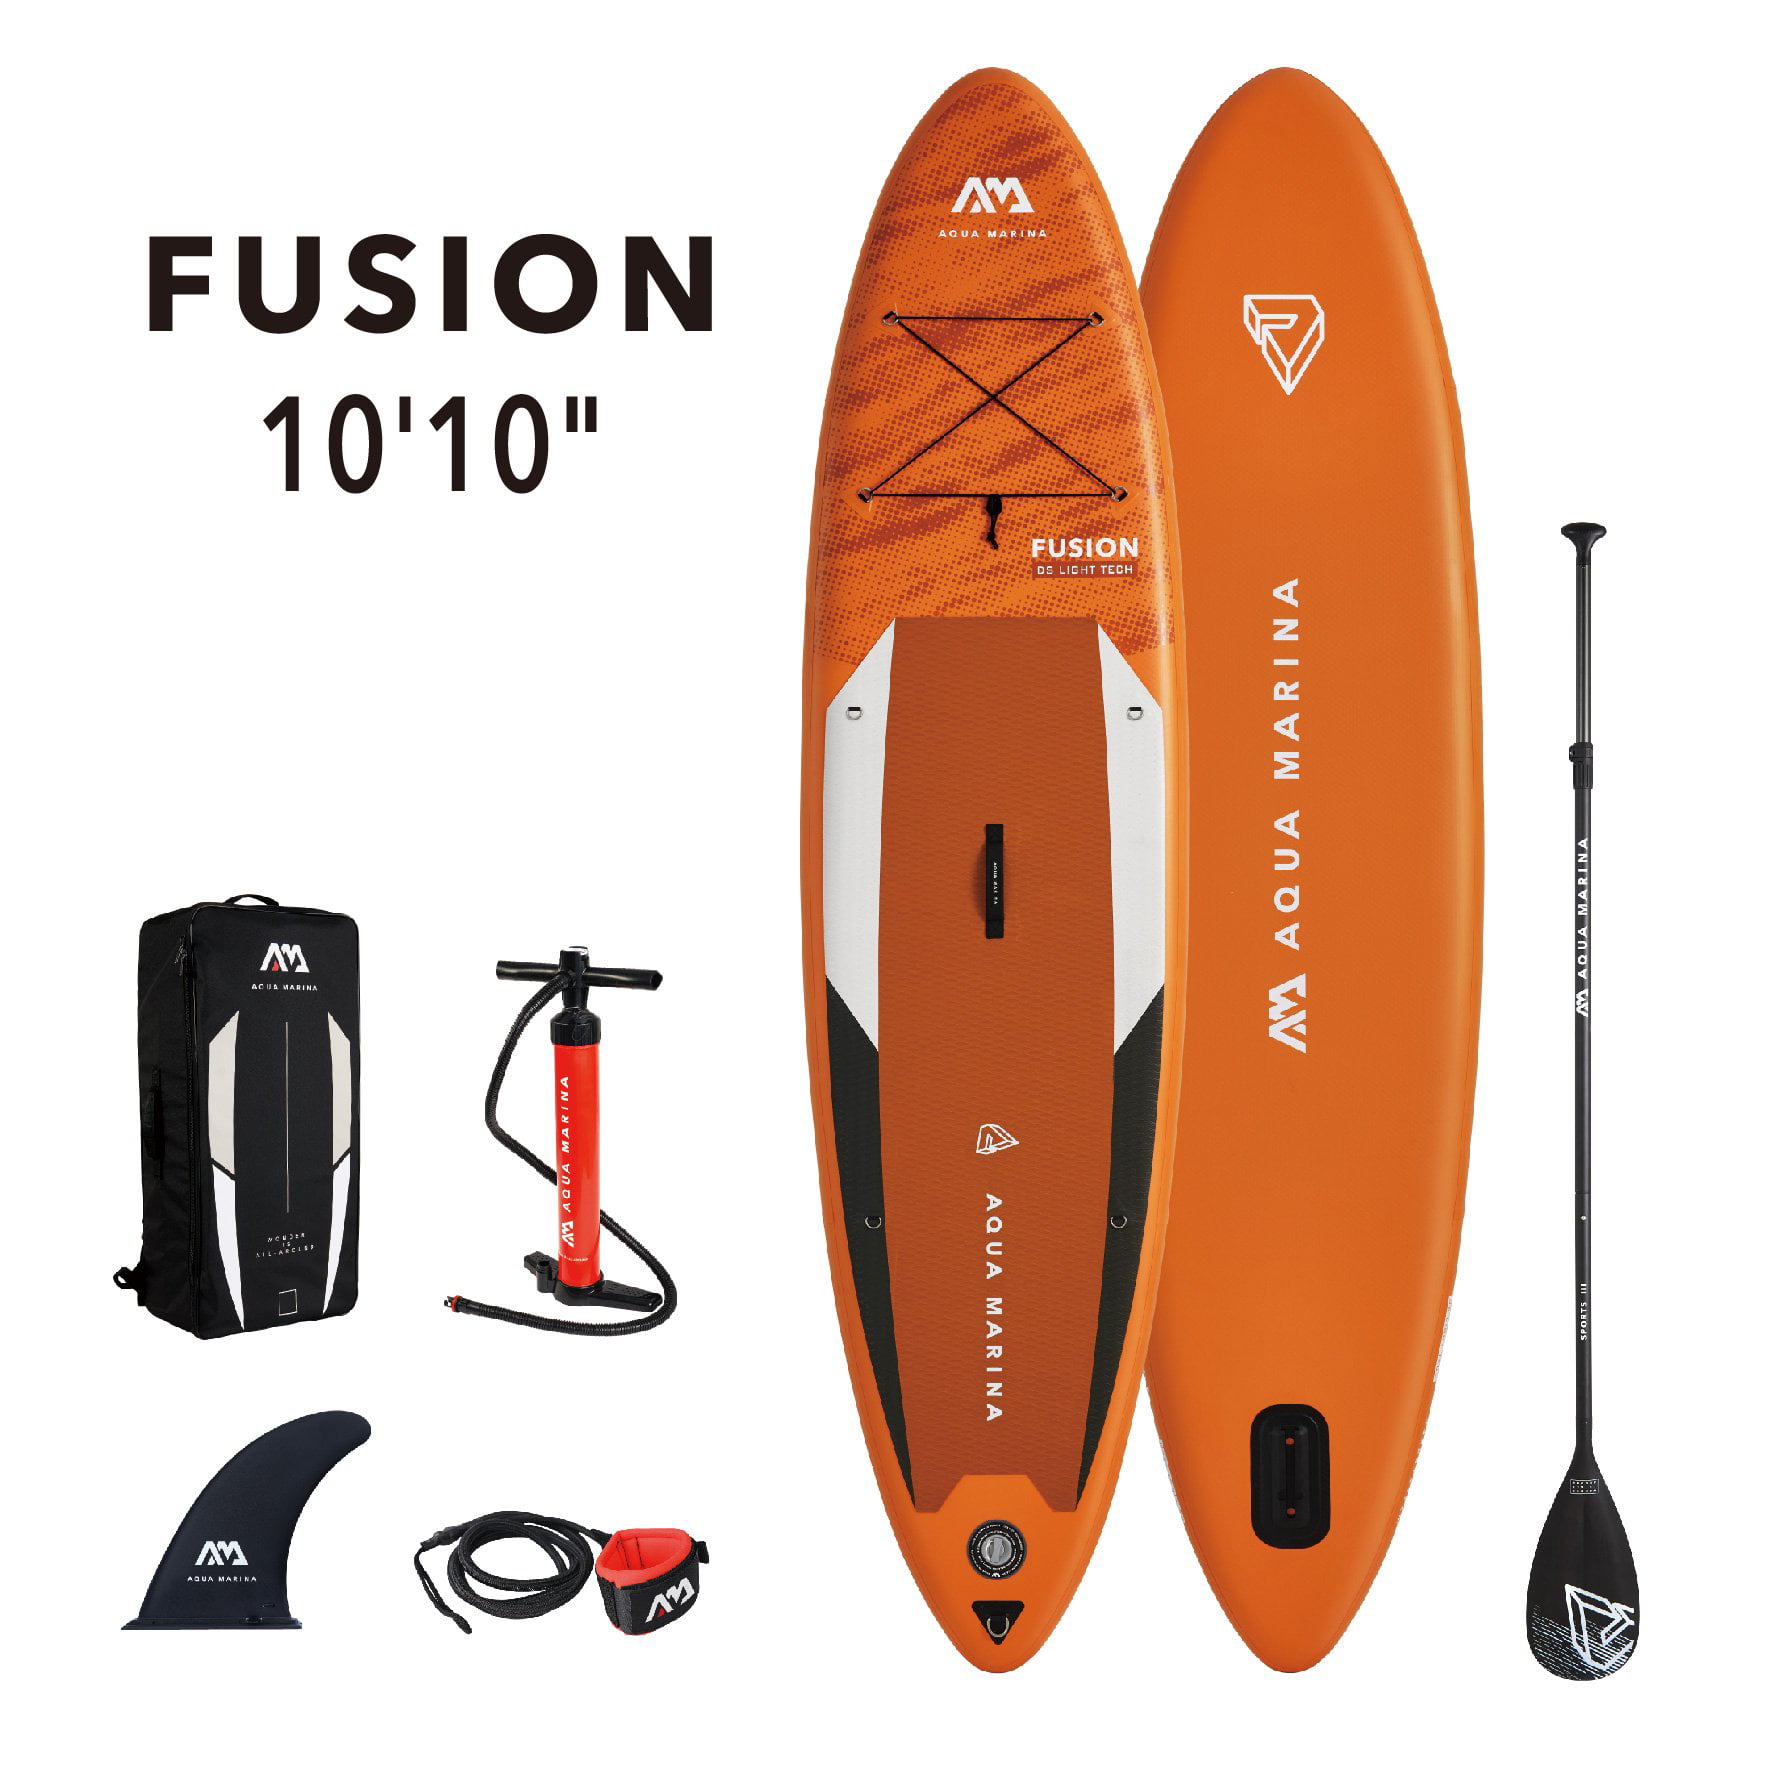 Inflatable Stand Up Paddle Board Lightweight Paddleboard Non-Slip Deck with ISUP Accessories Including Carry Bag Fin Leash Pump 17.9 lbs Bowdanie Inflatable SUP 10'5x 32.3x 6 